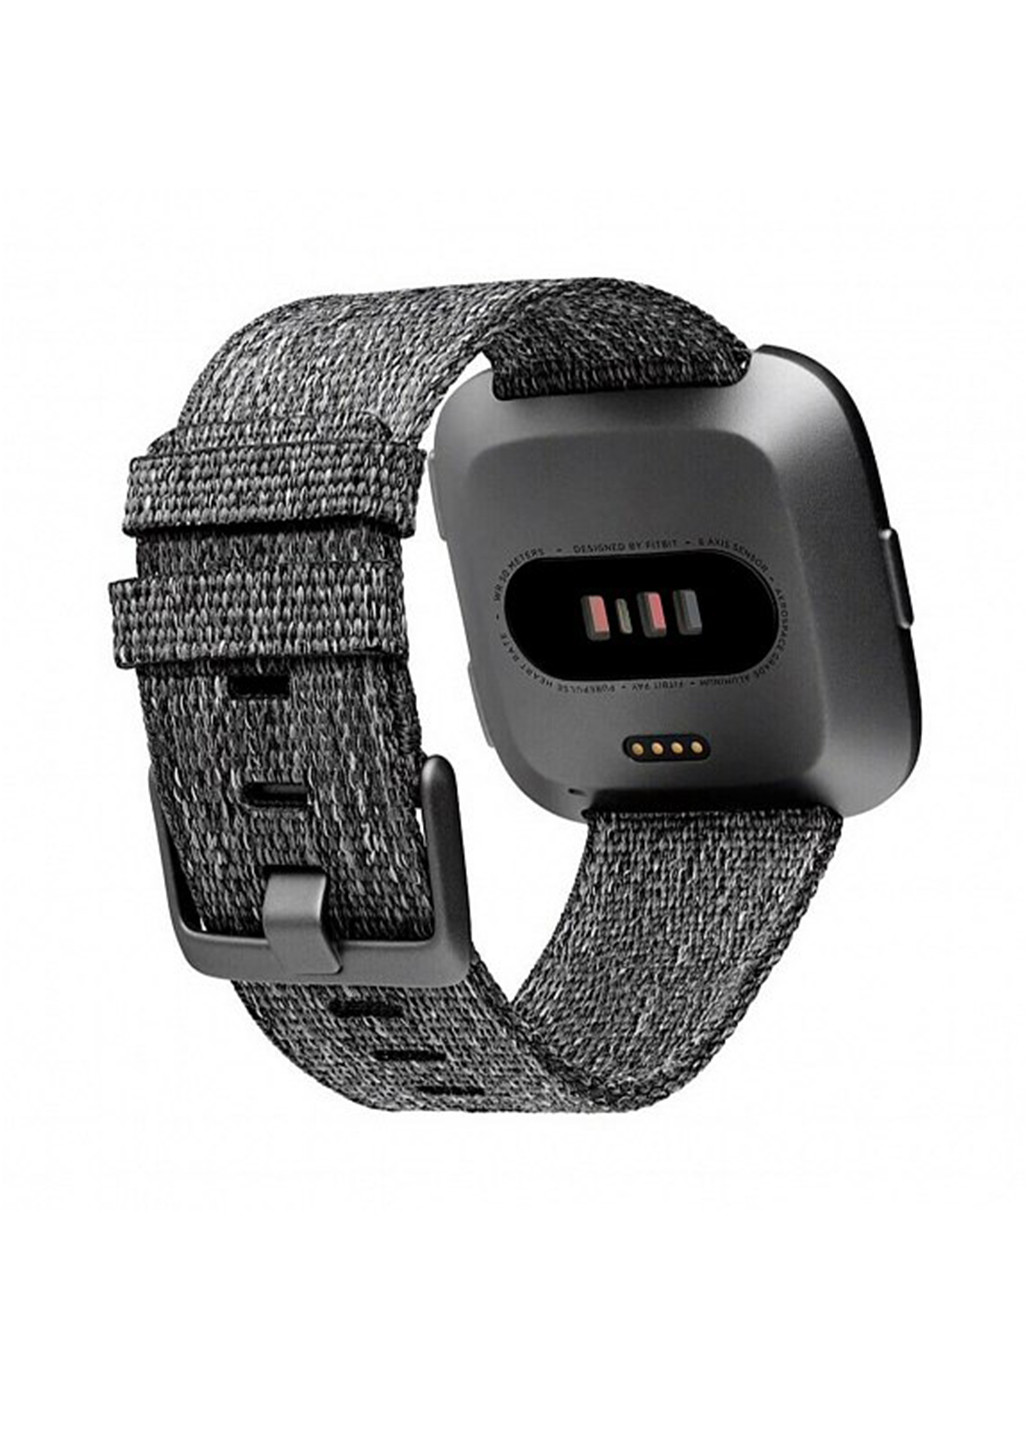 Смарт-часы Fitbit versa, special edition charcoal woven (fb505bkgy) (144255333)